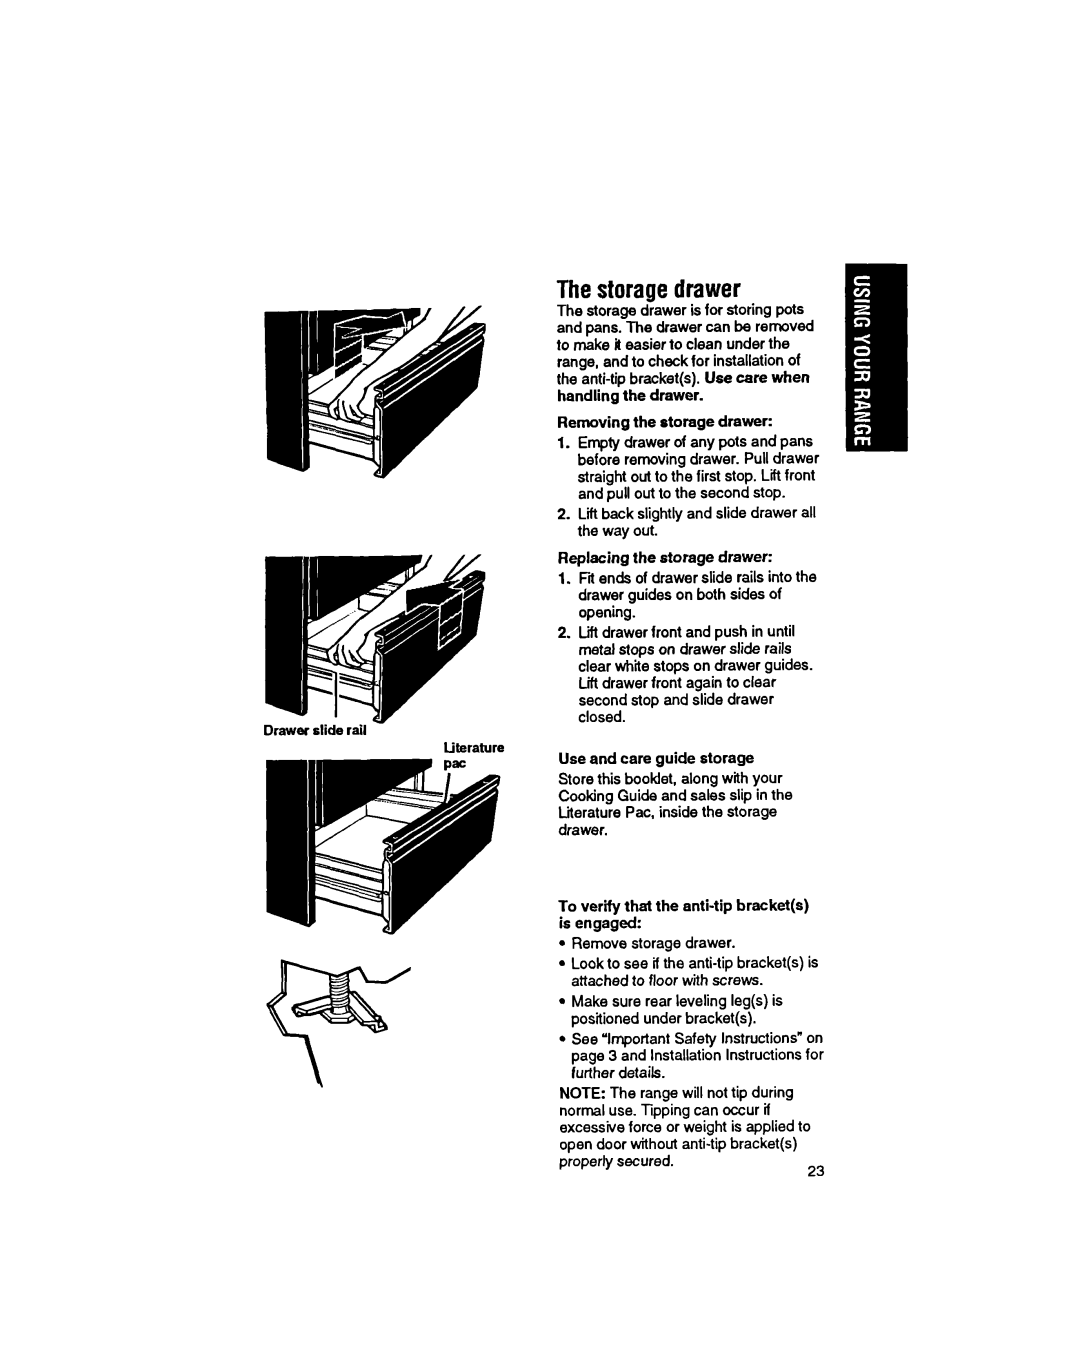 Whirlpool SS373PEX Thestorauedrawer, Removing the storage drawer, Replacing the storage drawer, Use and care guide storage 